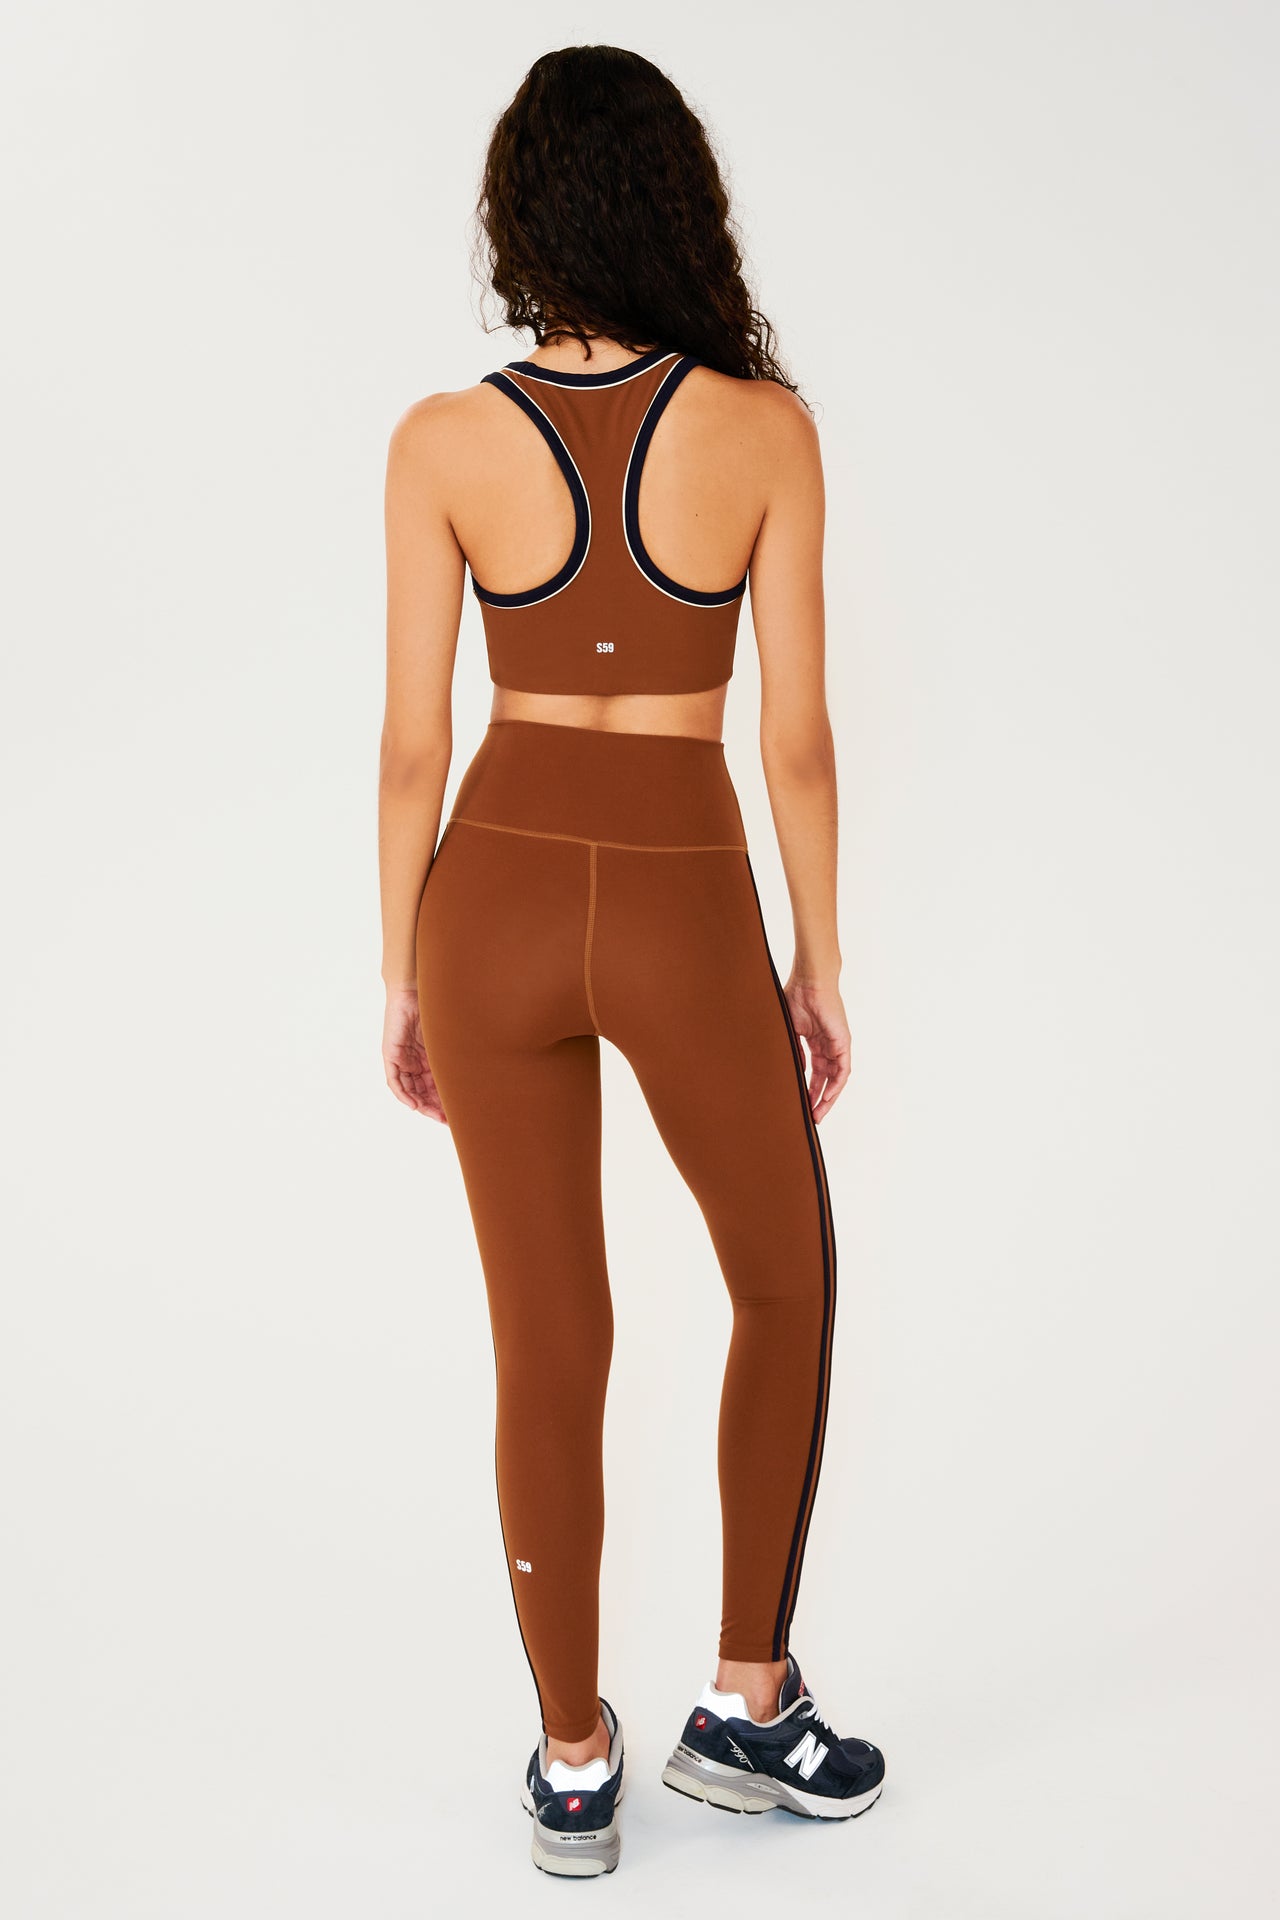 Full back view of girl wearing reddish brown leggings with two thin black stripes down the side and a reddish brown sports bra with dark blue shoes